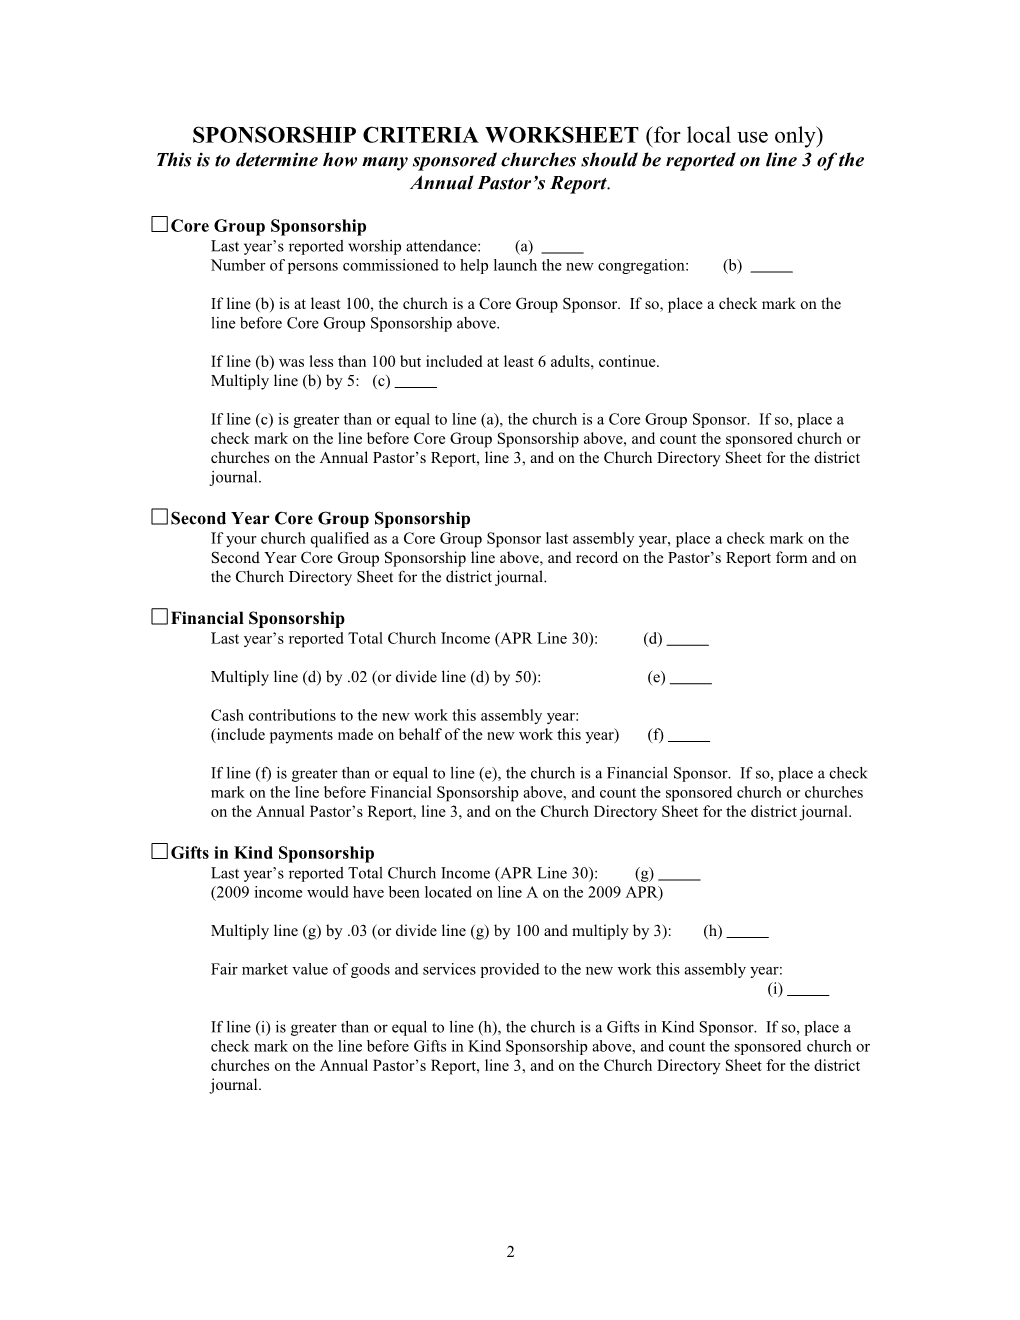 SPONSORSHIP CRITERIA WORKSHEET (For Local Use Only)